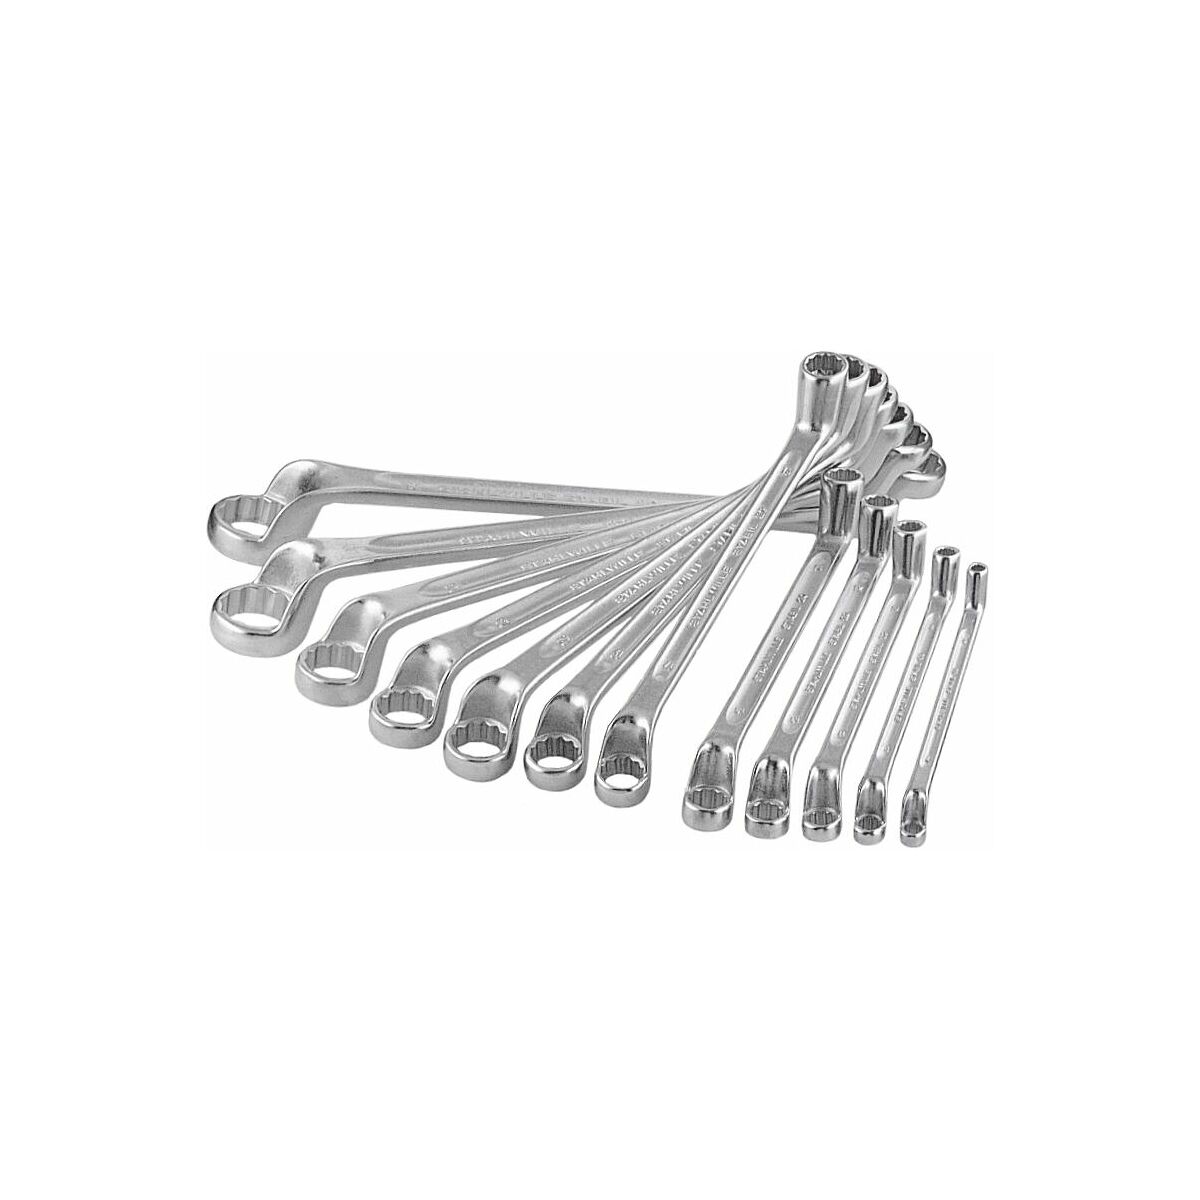 Buy Taparia 1812 6x7 mm to 30x32 mm 12pc Ring Spanner Set on IBO.com &  Store @ Best Price. Genuine Products | Quick Delivery | Pay on Delivery